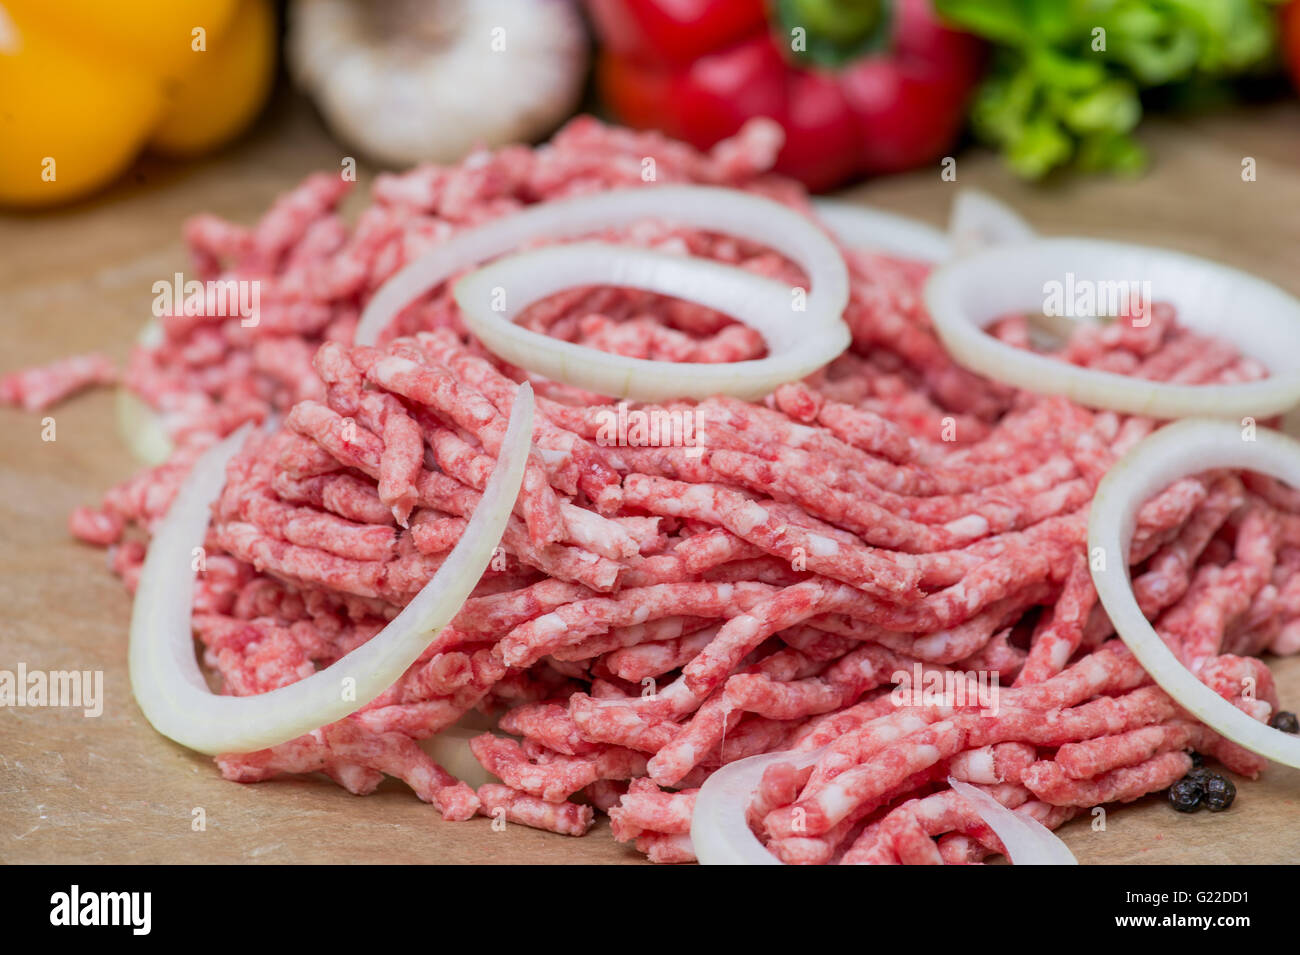 Raw minced meat and onion rings close-up with fresh vegetables on the background Stock Photo